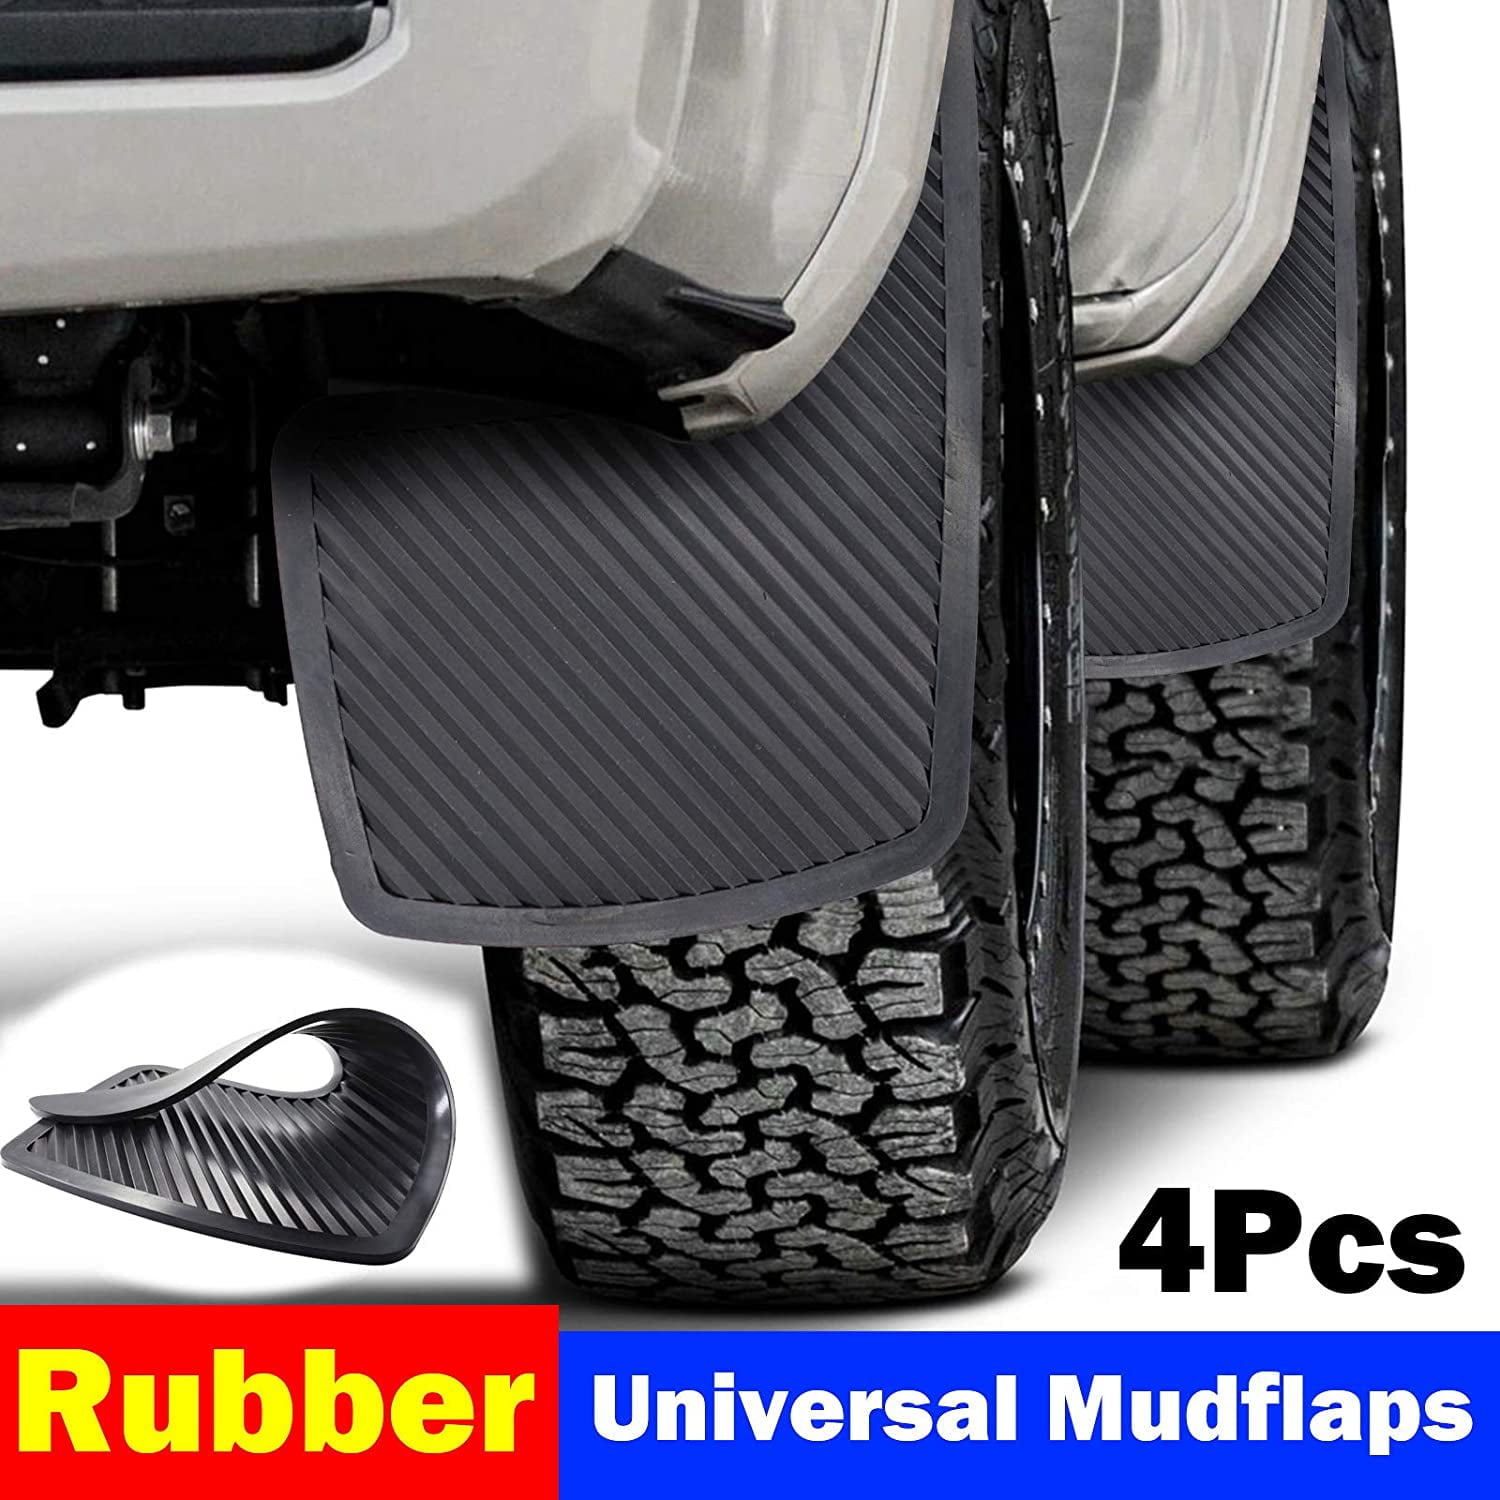  4PCS Mud Flaps for Car Front & Rear Wheel,Universal Splash  Guard Automotive Exterior Accessories Fits for Car SUV RV Truck,Car  Essentials Mud Guards with Installation Tools : Automotive